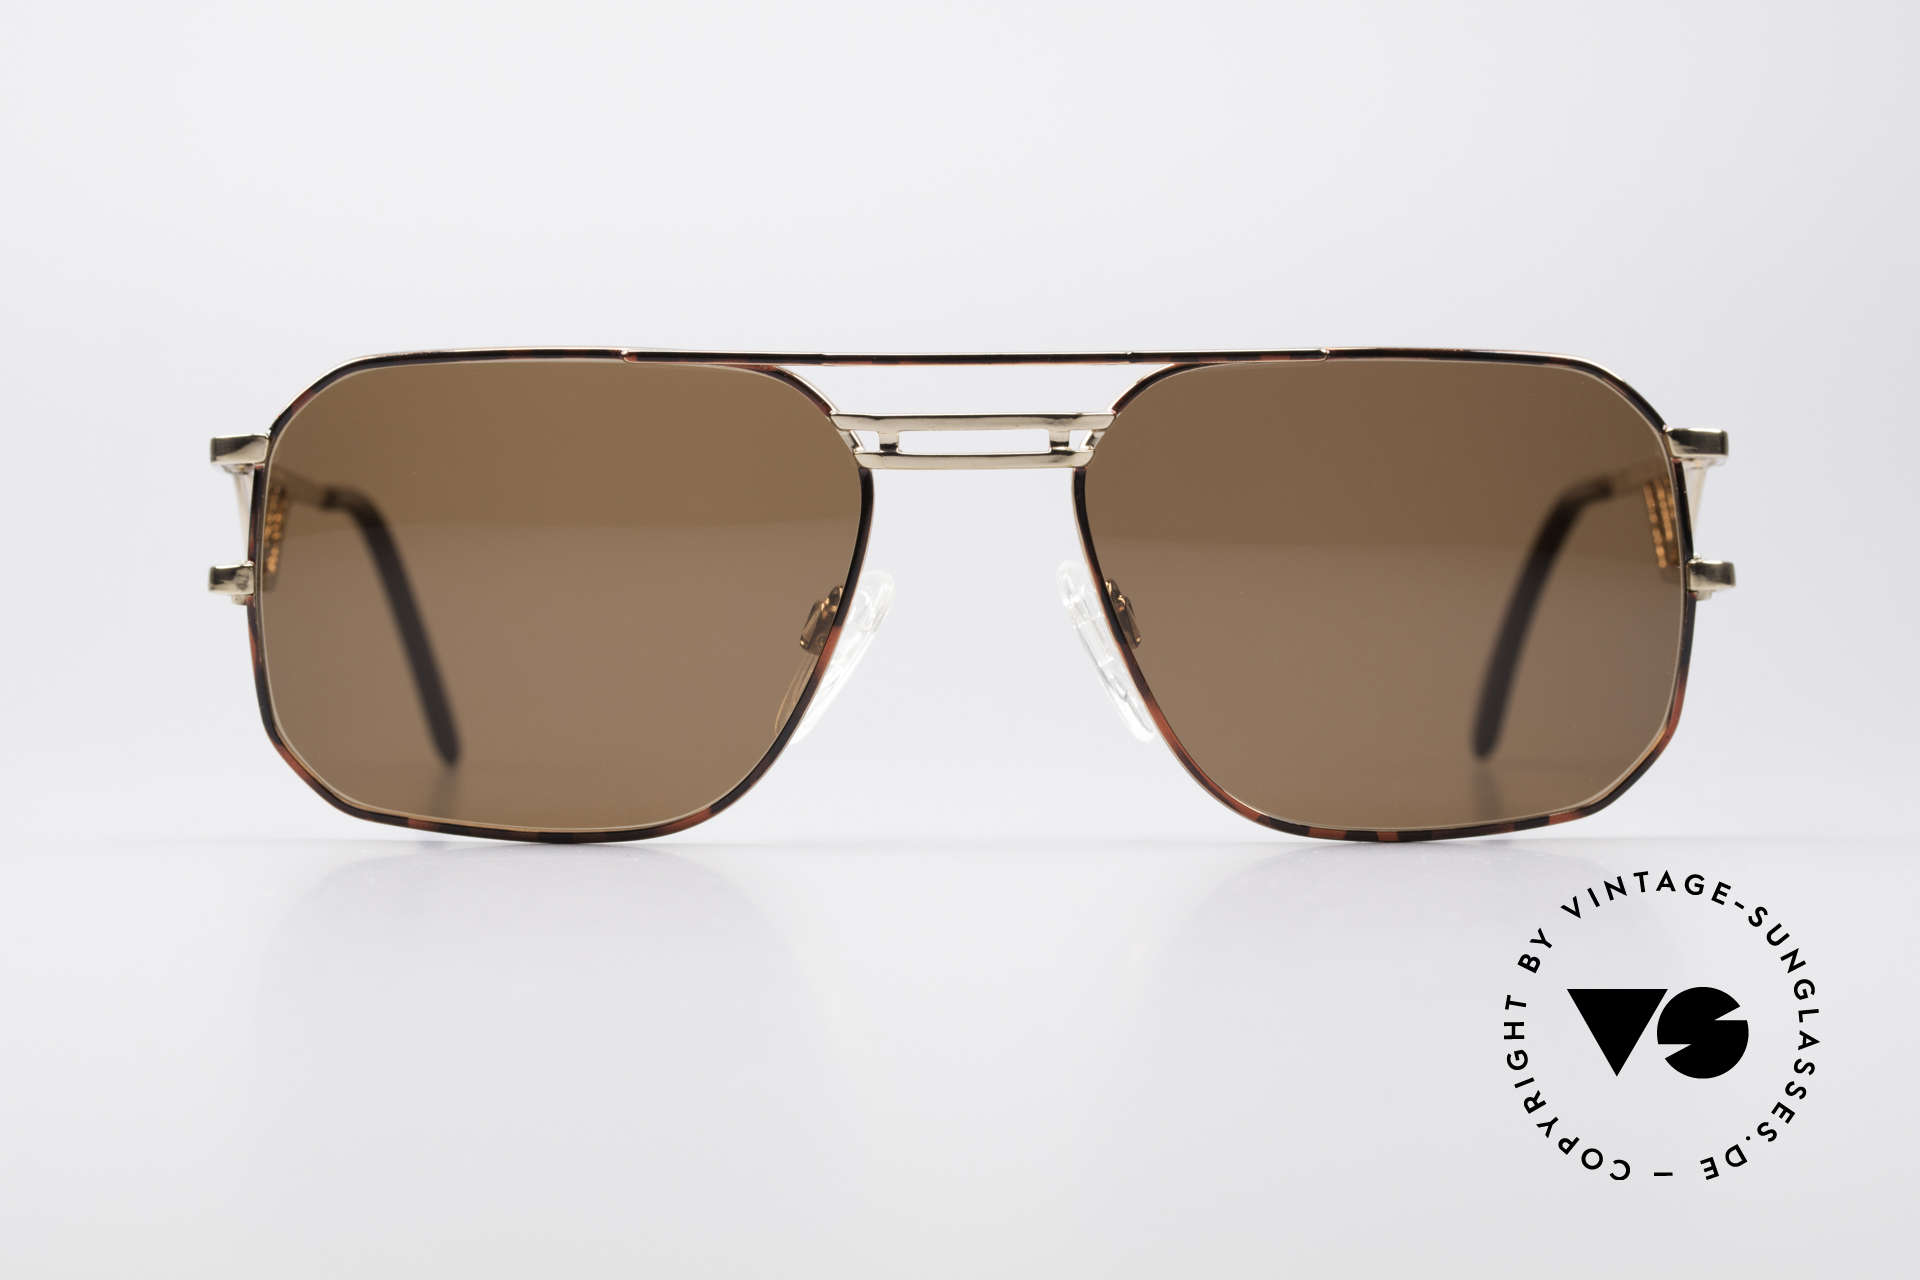 Neostyle Boutique 306 80's Men's Sunglasses Vintage, sought-after model of the 'BOUTIQUE SERIES', Made for Men